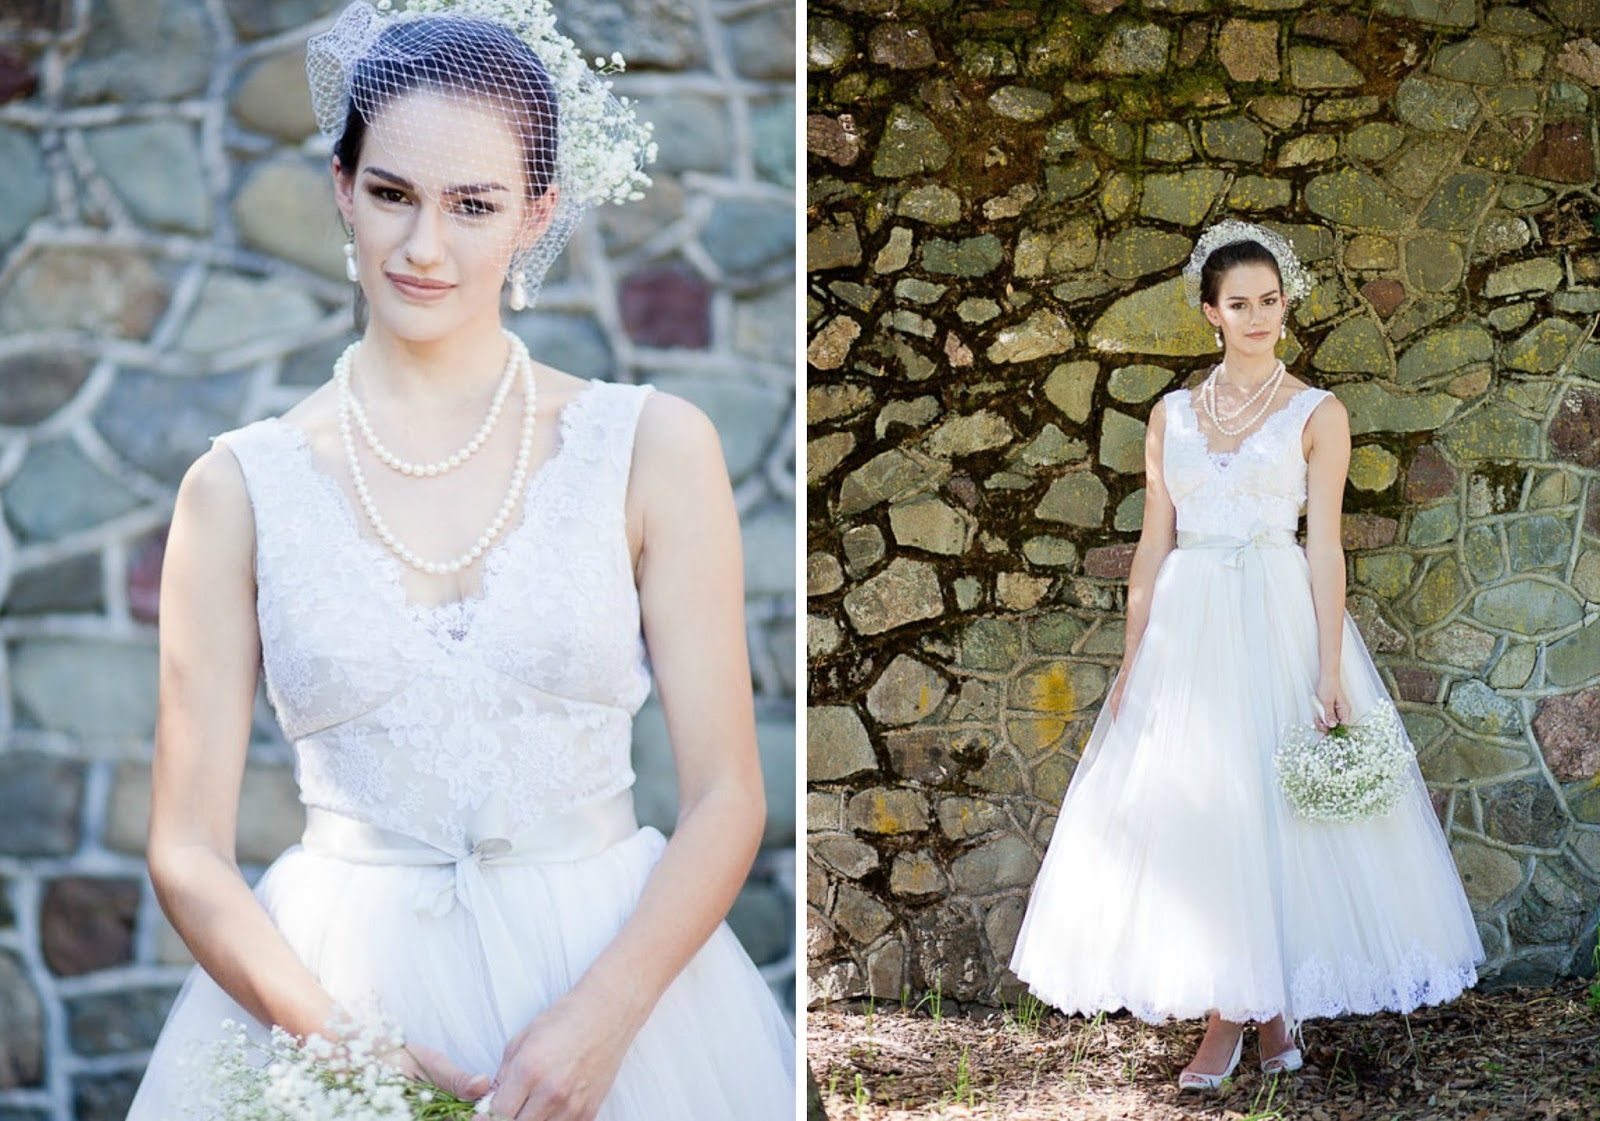 BRIDE CHIC: SAMPLE SALE TUESDAY